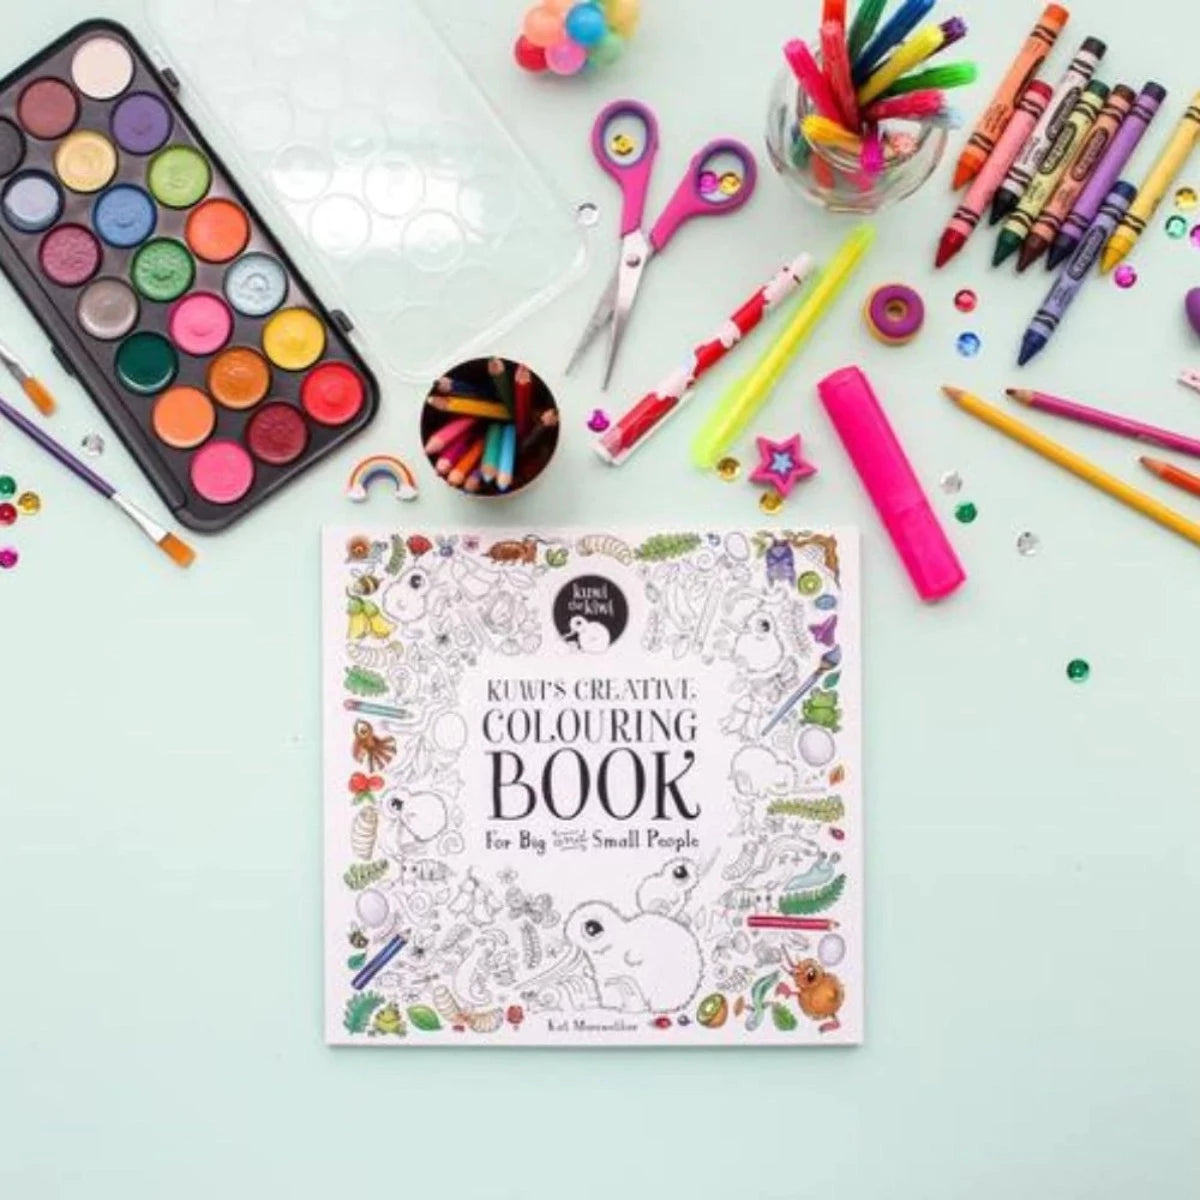 "Kuwi's Creative Colouring Book" by Kat Quin